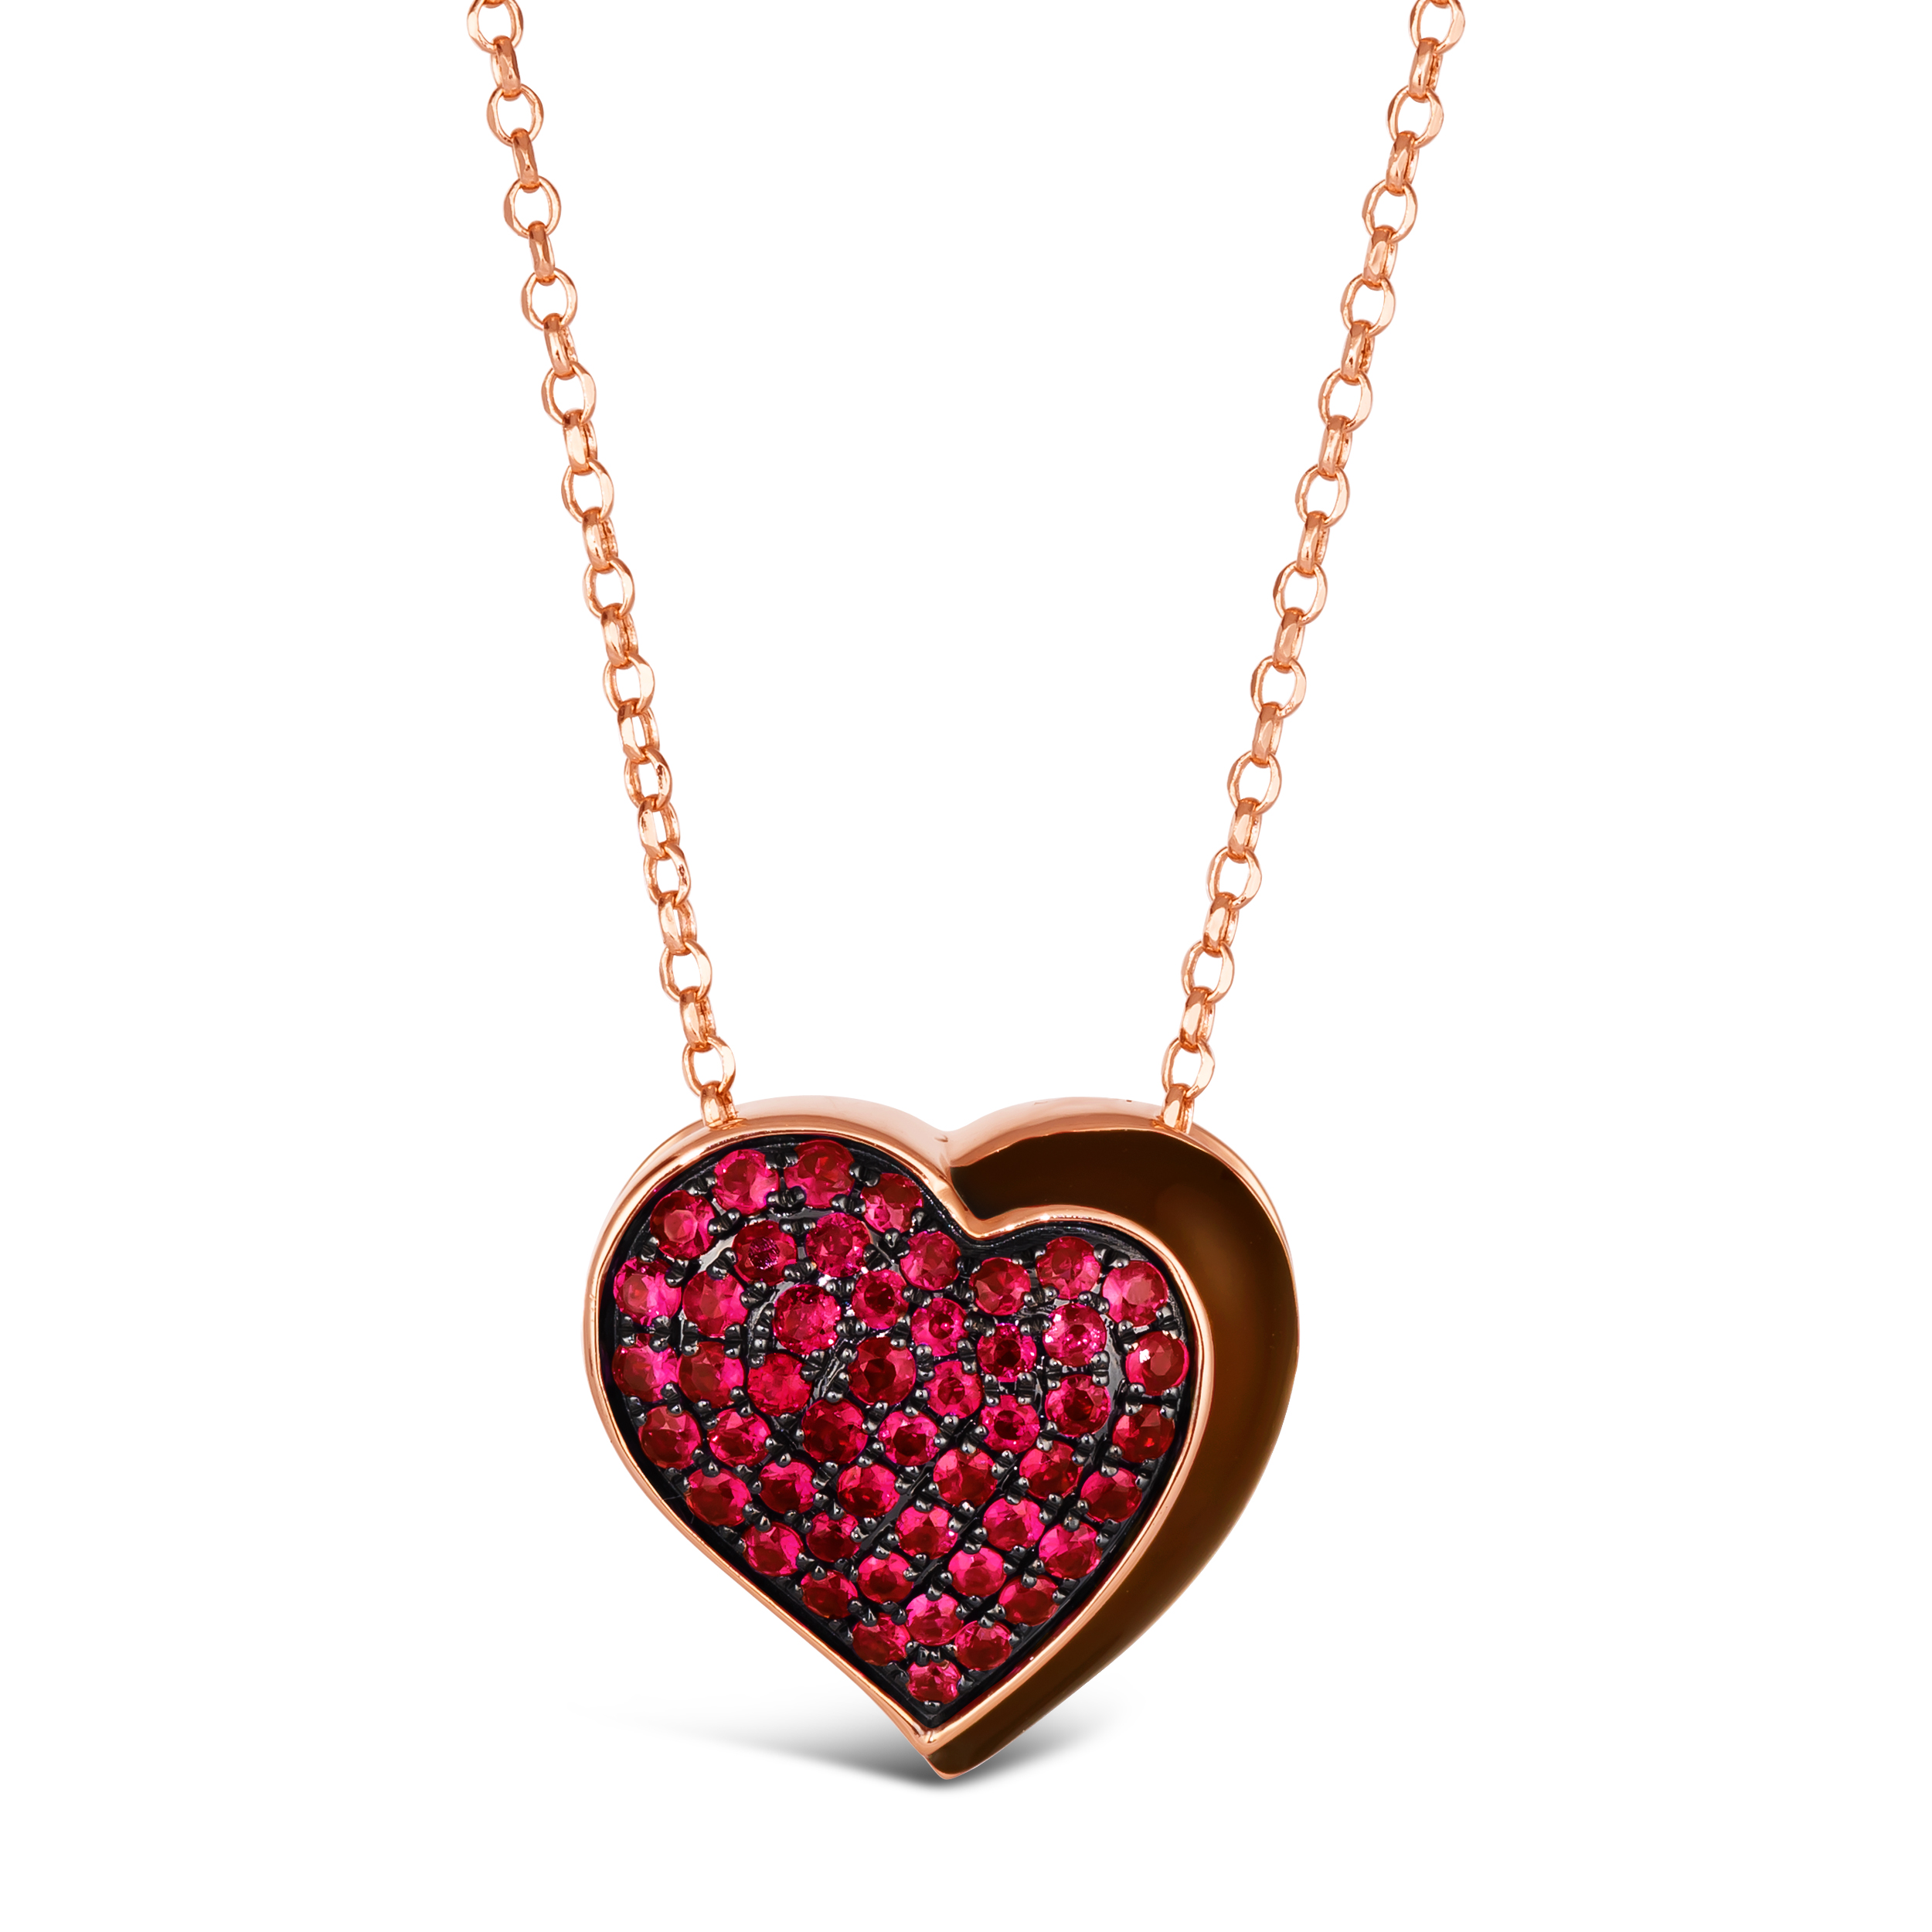 Clover-Heart Change Necklace from Black Diamonds New York